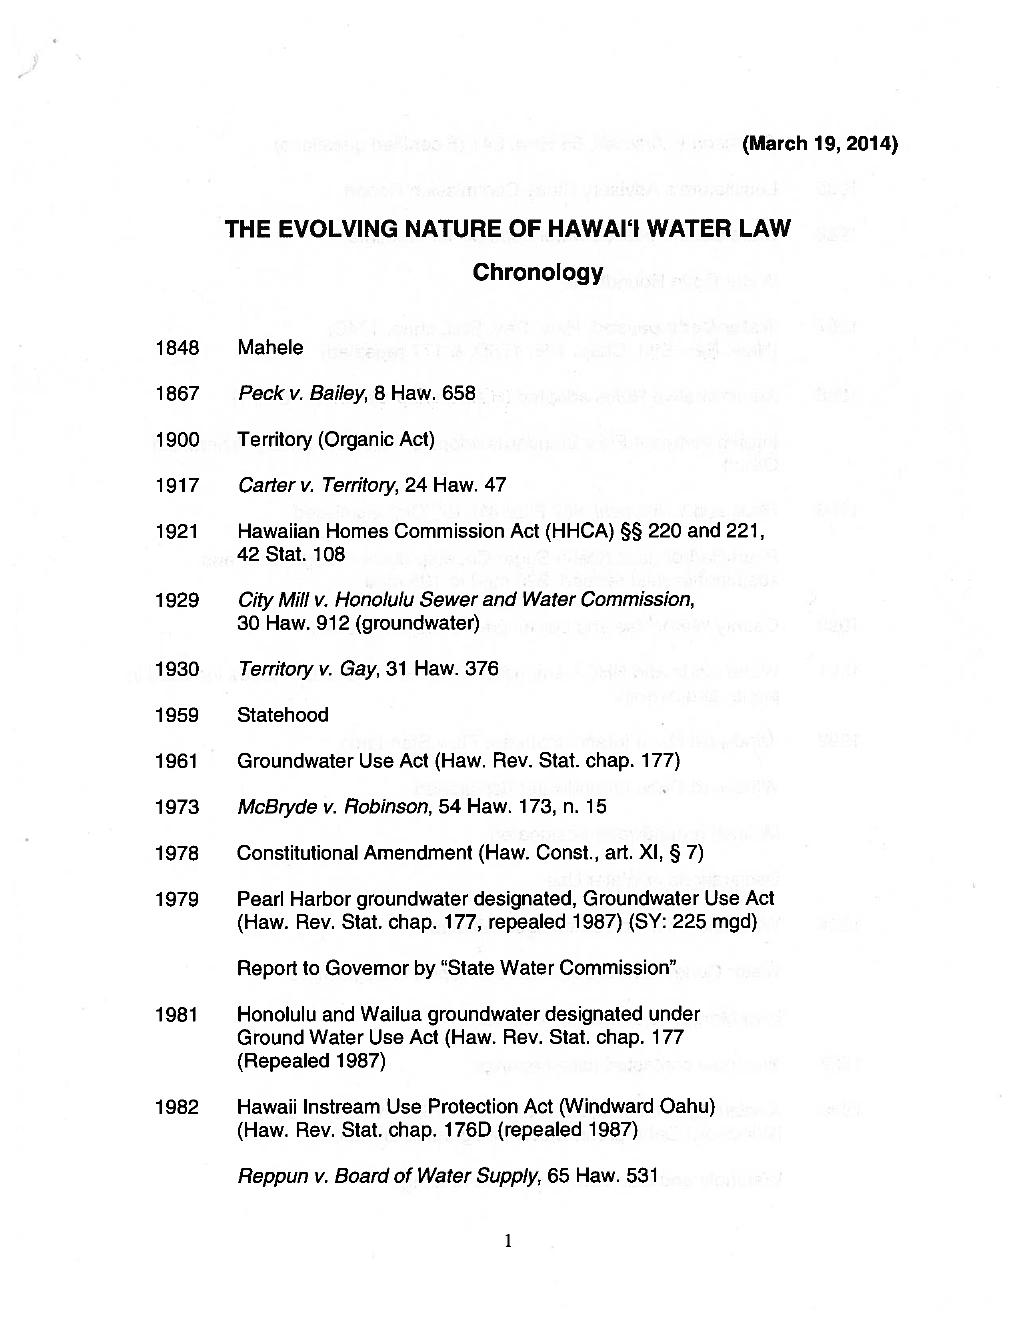 THE EVOLVING NATURE of HAWAI'i WATER LAW Chronology